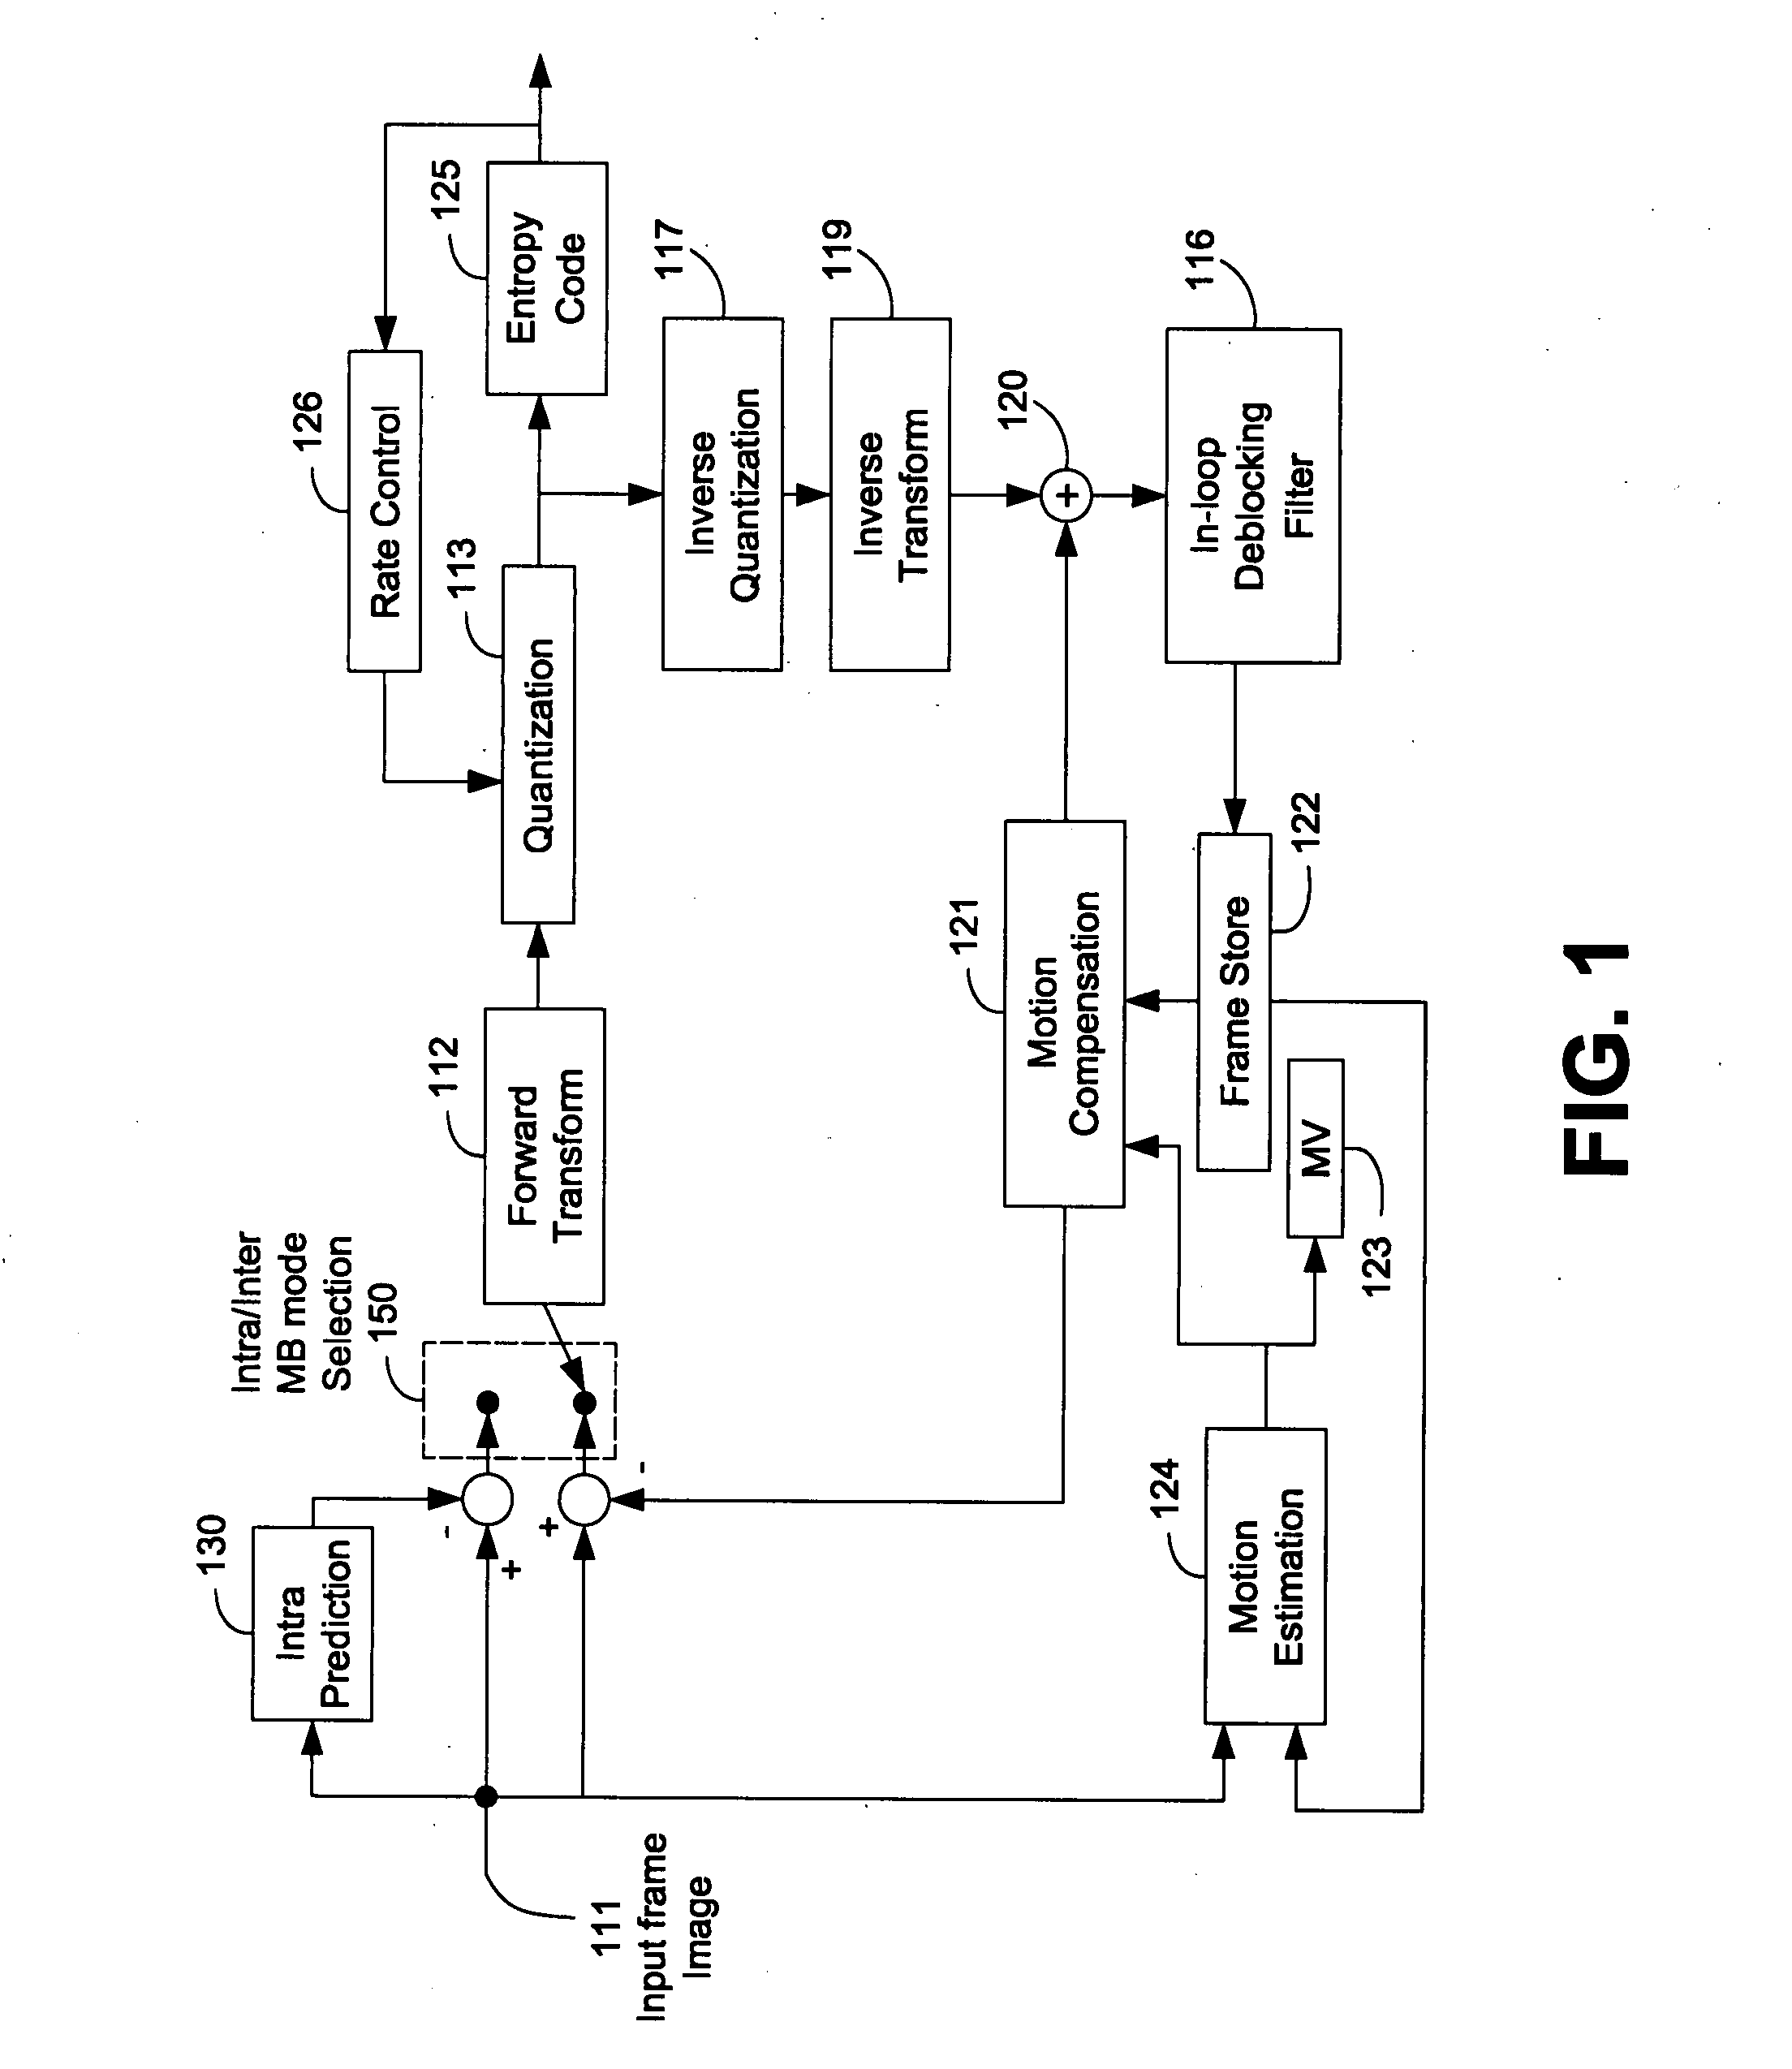 Method and device for tracking error propagation and refreshing a video stream